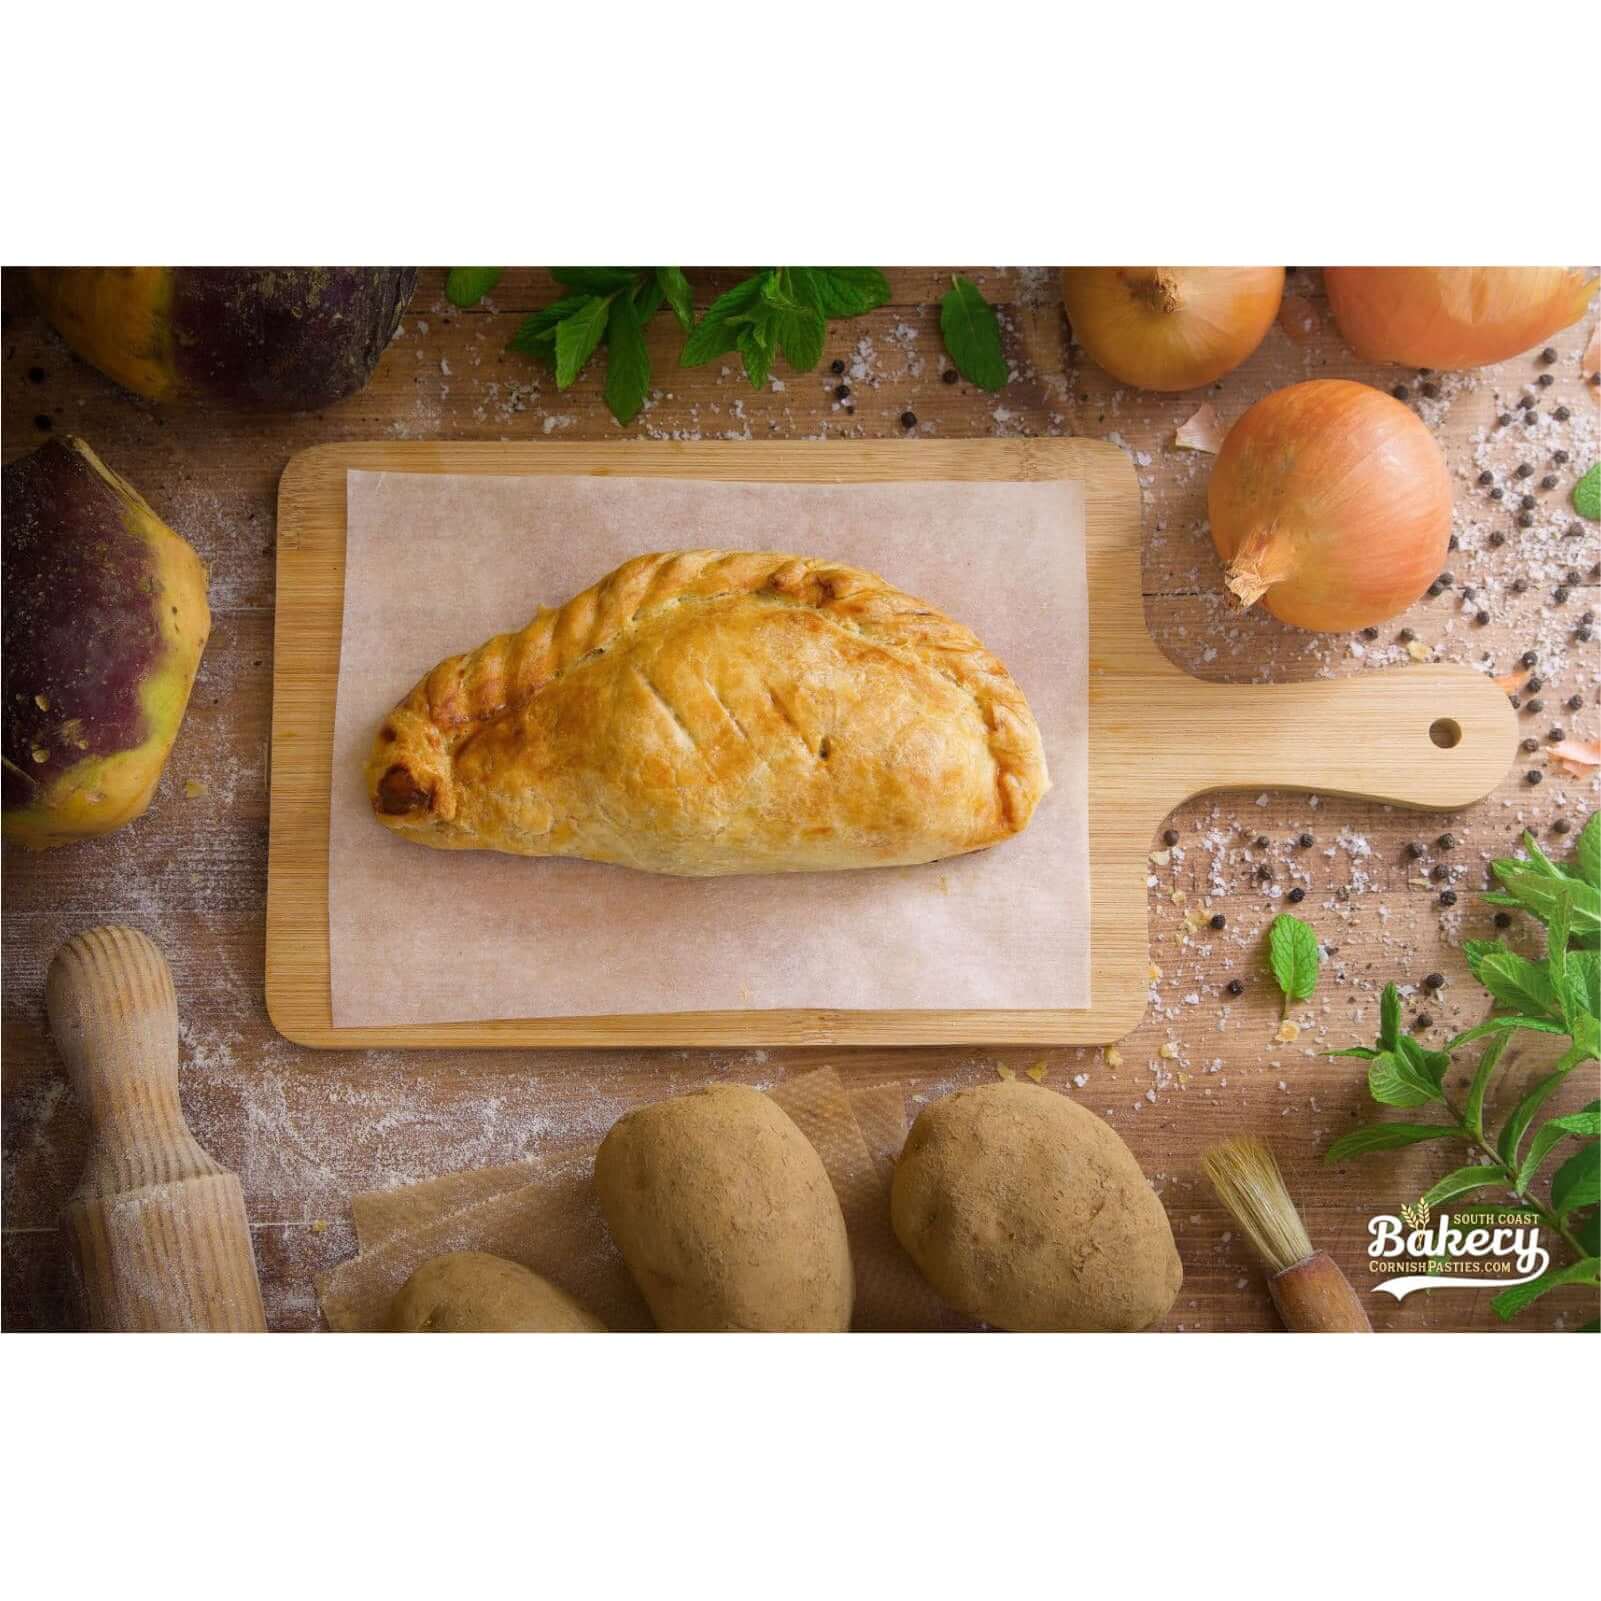 lamb & mint pasty - available for a limited time only